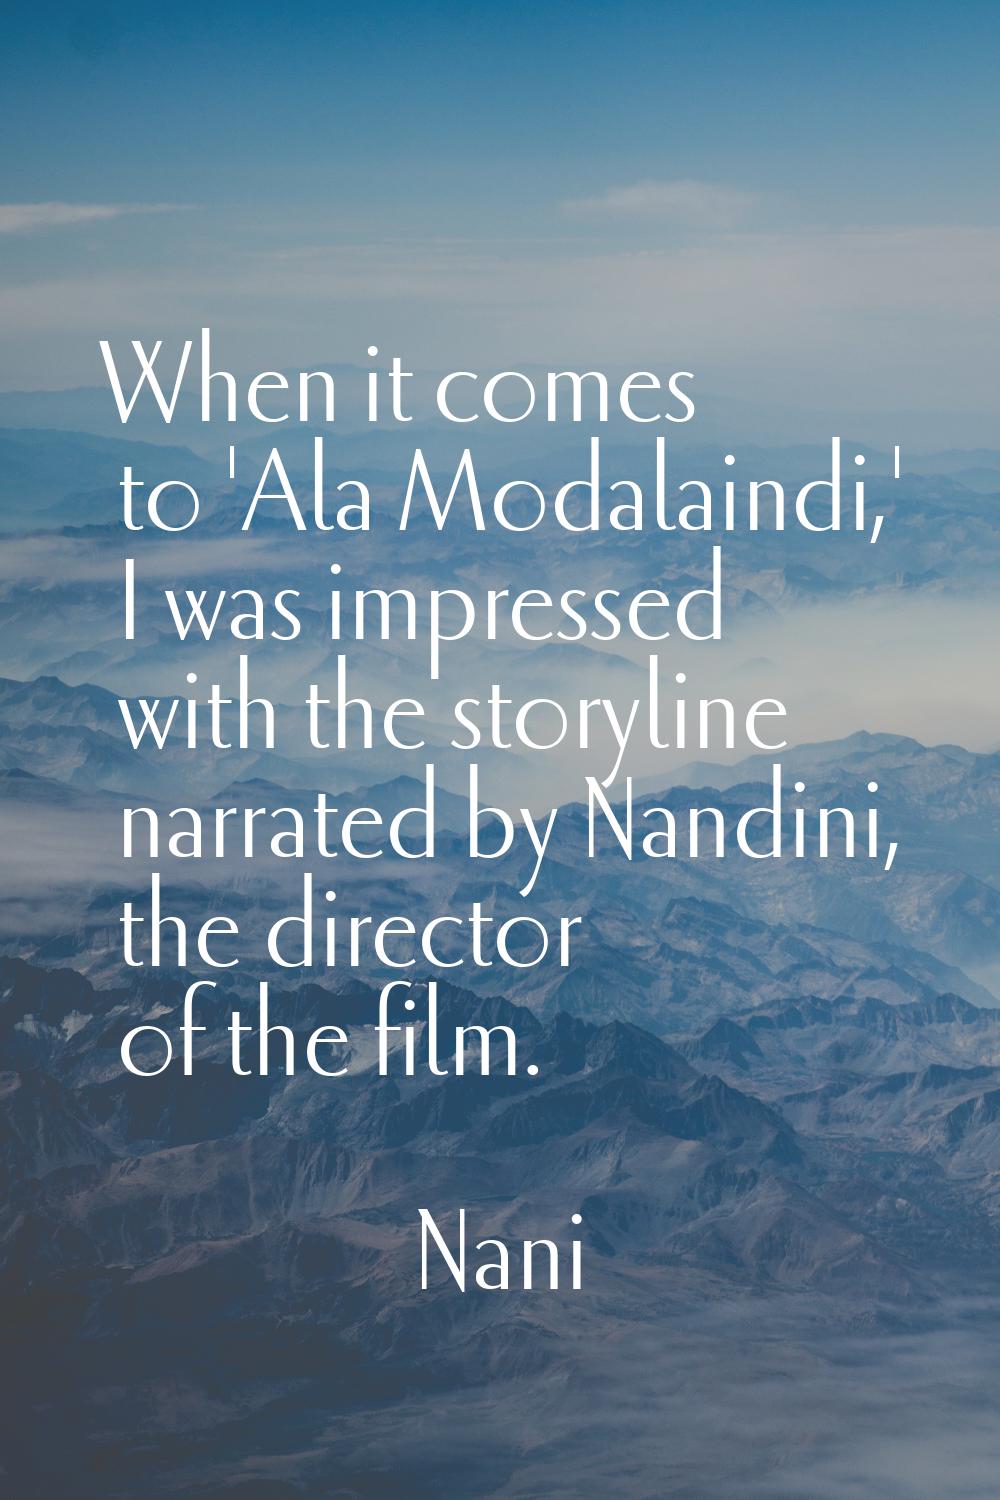 When it comes to 'Ala Modalaindi,' I was impressed with the storyline narrated by Nandini, the dire